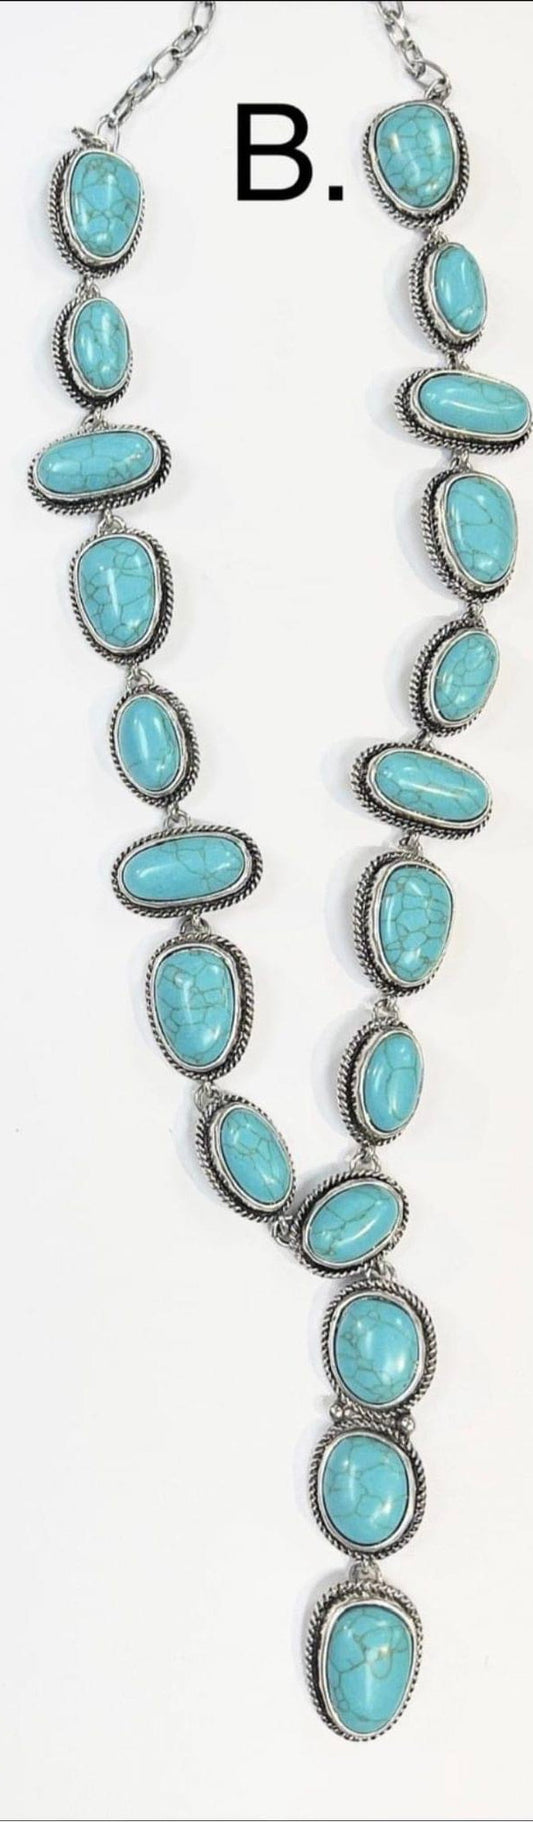 Y-drop howlite turquoise necklace